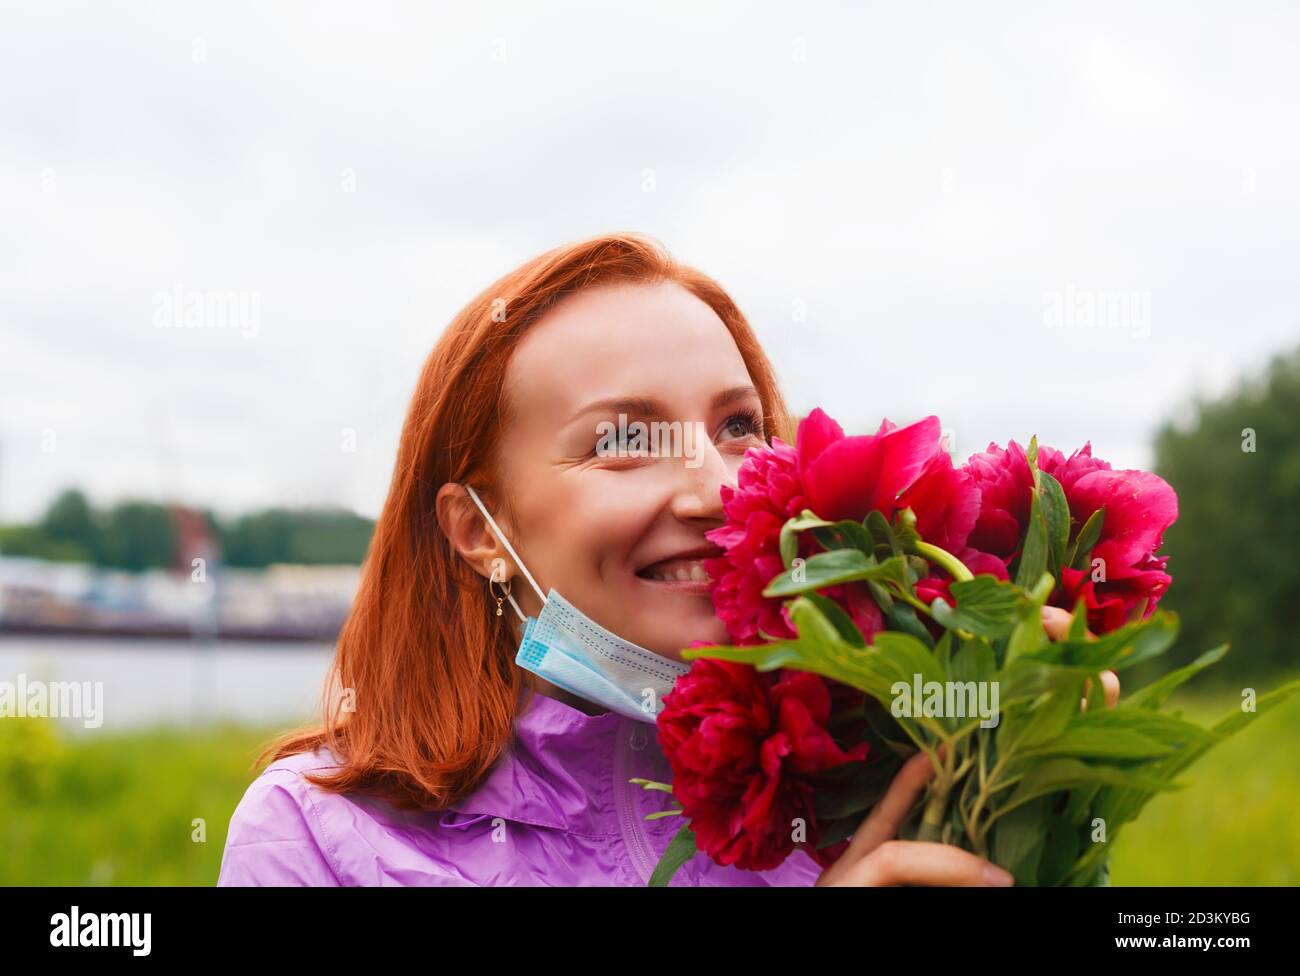 Revival after coronavirus. Smiling happy redhead woman sniffs pink flowers Stock Photo